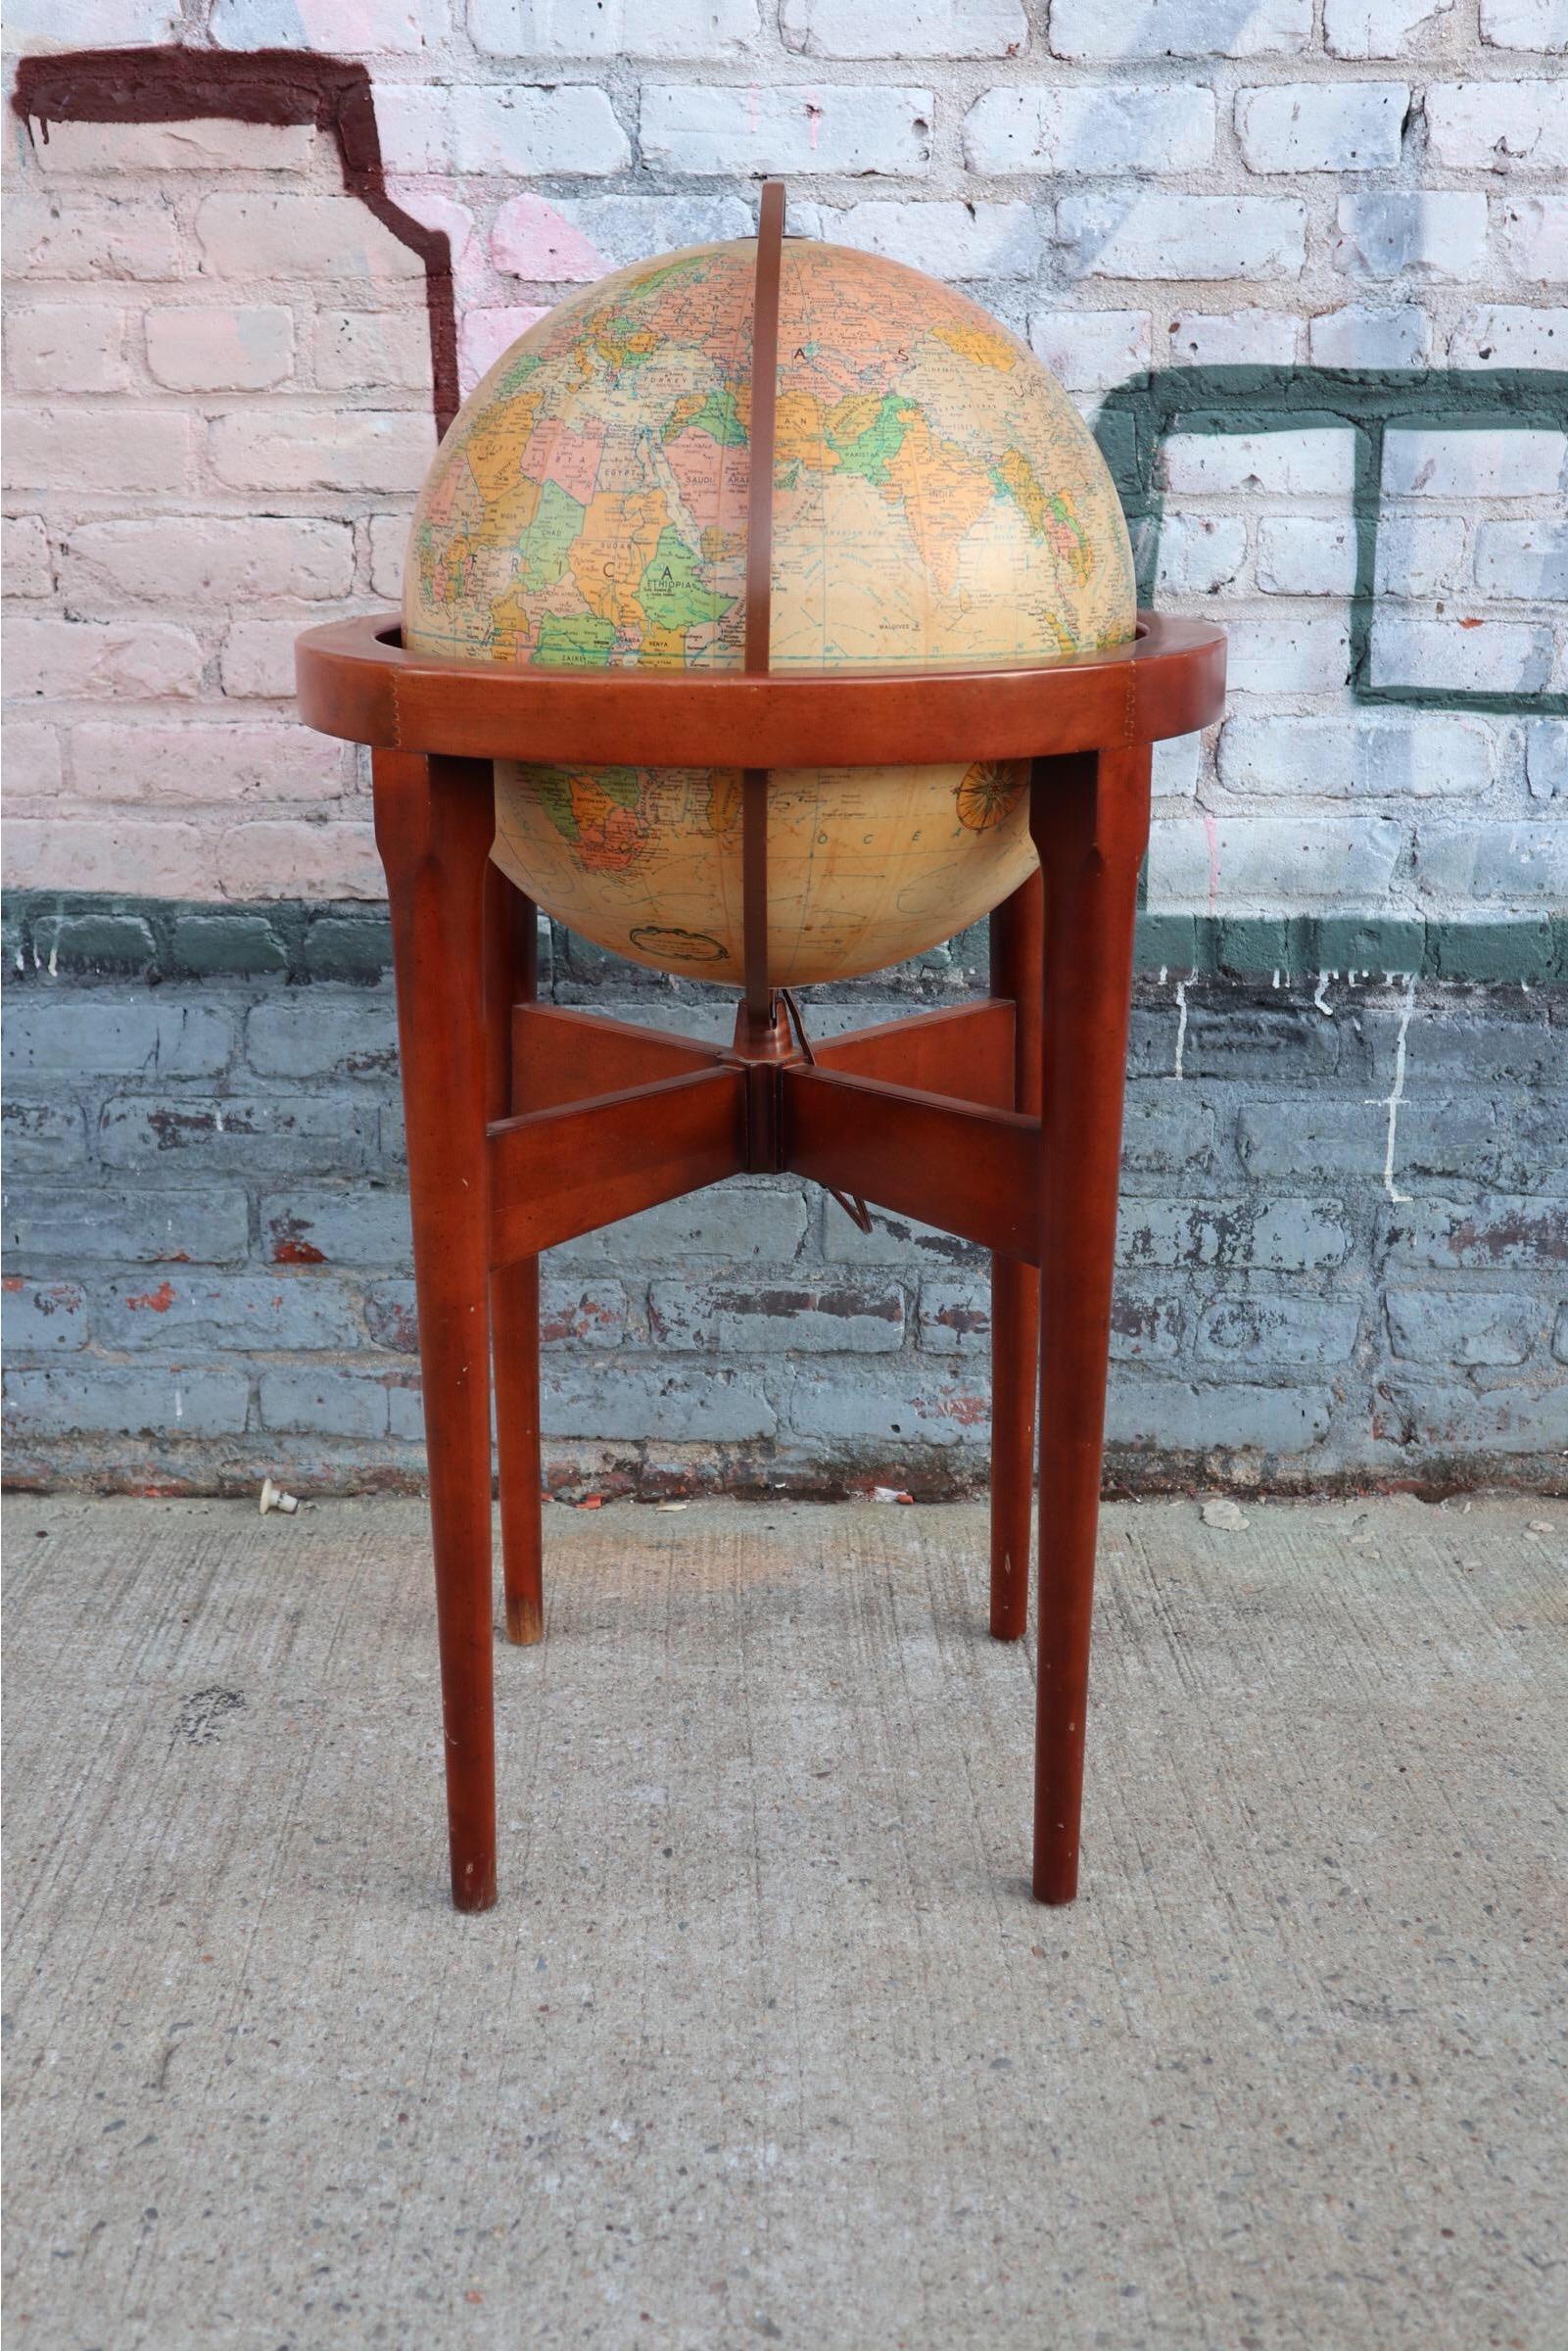 Beautiful glow or glowing globe by Replogle. Elegant lines on strudel wooden frame with sculptural tapered legs. The globe ball stands upright but is also adjustable to 23.5 degrees to mimic actual axis. Gorgeous warm glowing effect at night. Can be